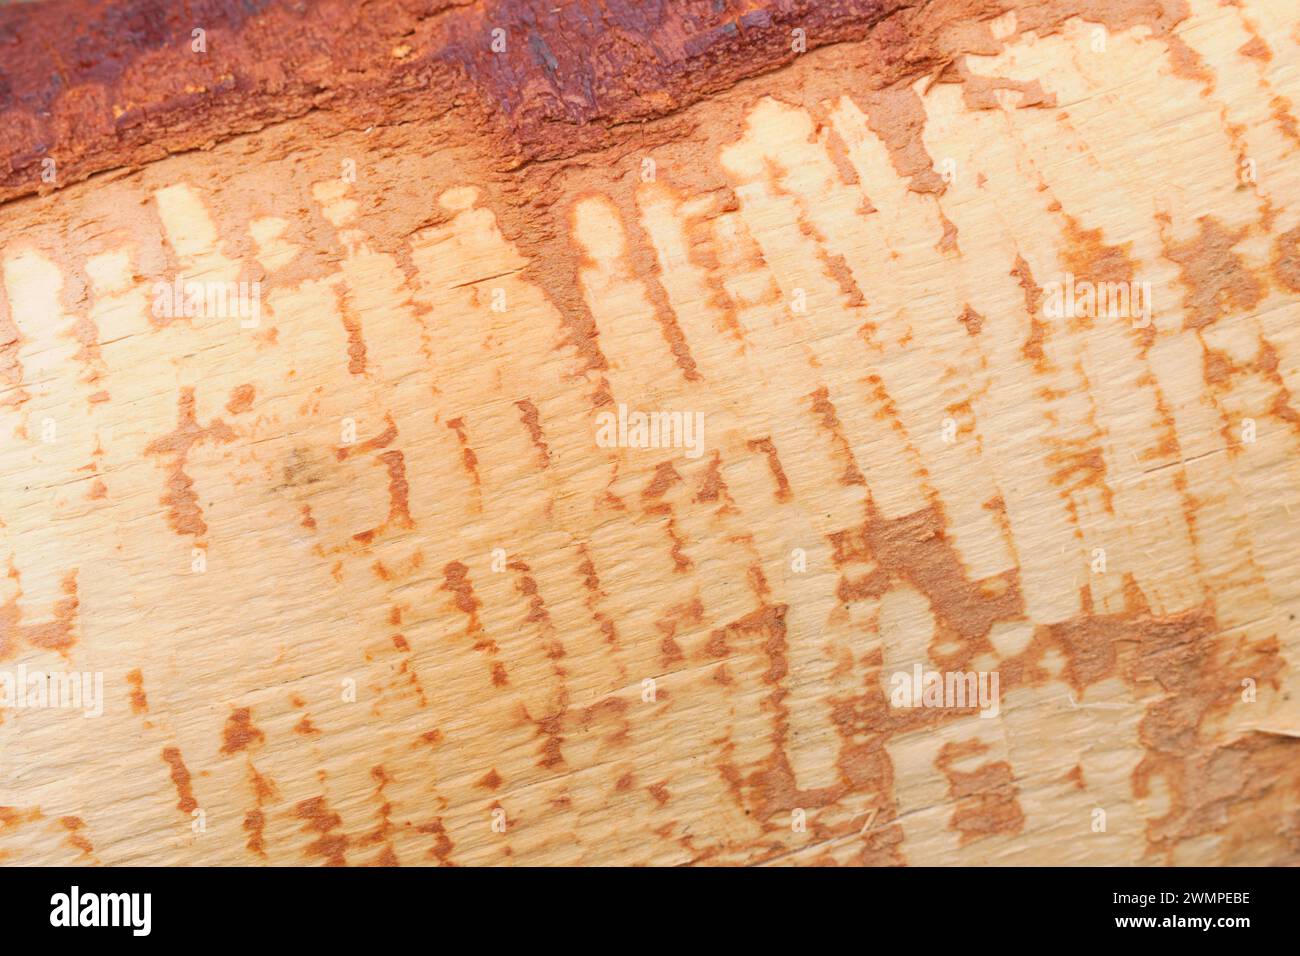 European Beaver (Castor fiber) teeth marks on felled silver birch tree (Betula pendula) where they have chewed the bark off for food, Perthshire. Stock Photo